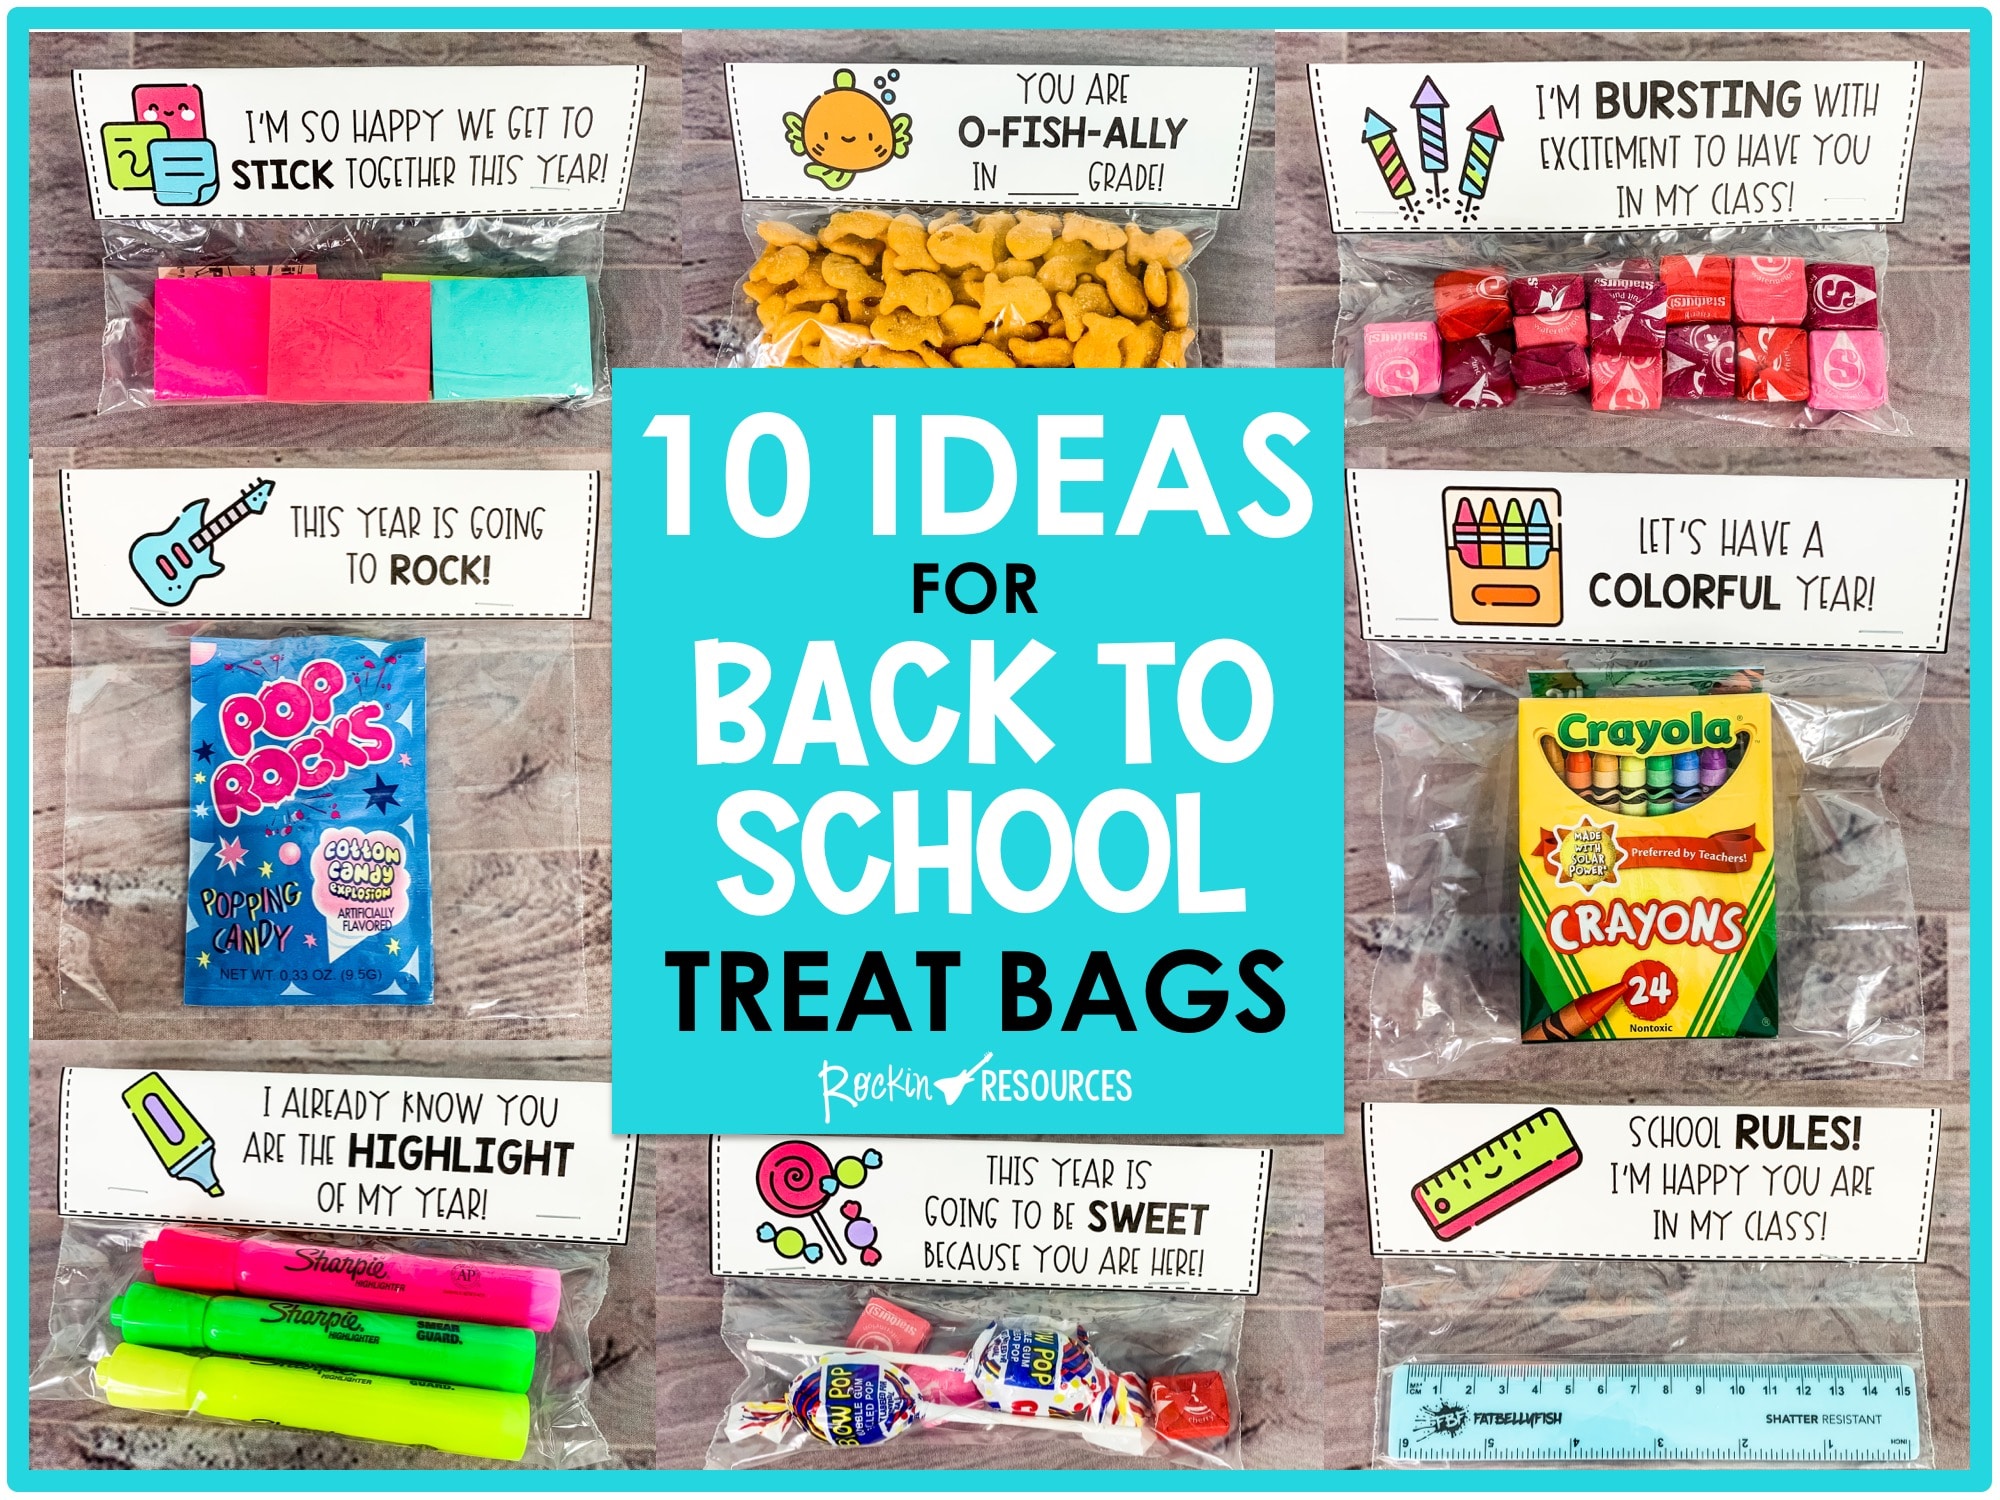 10 Ideas for Back-to-School Treat Bags (Non-food ideas included!) - Rockin  Resources